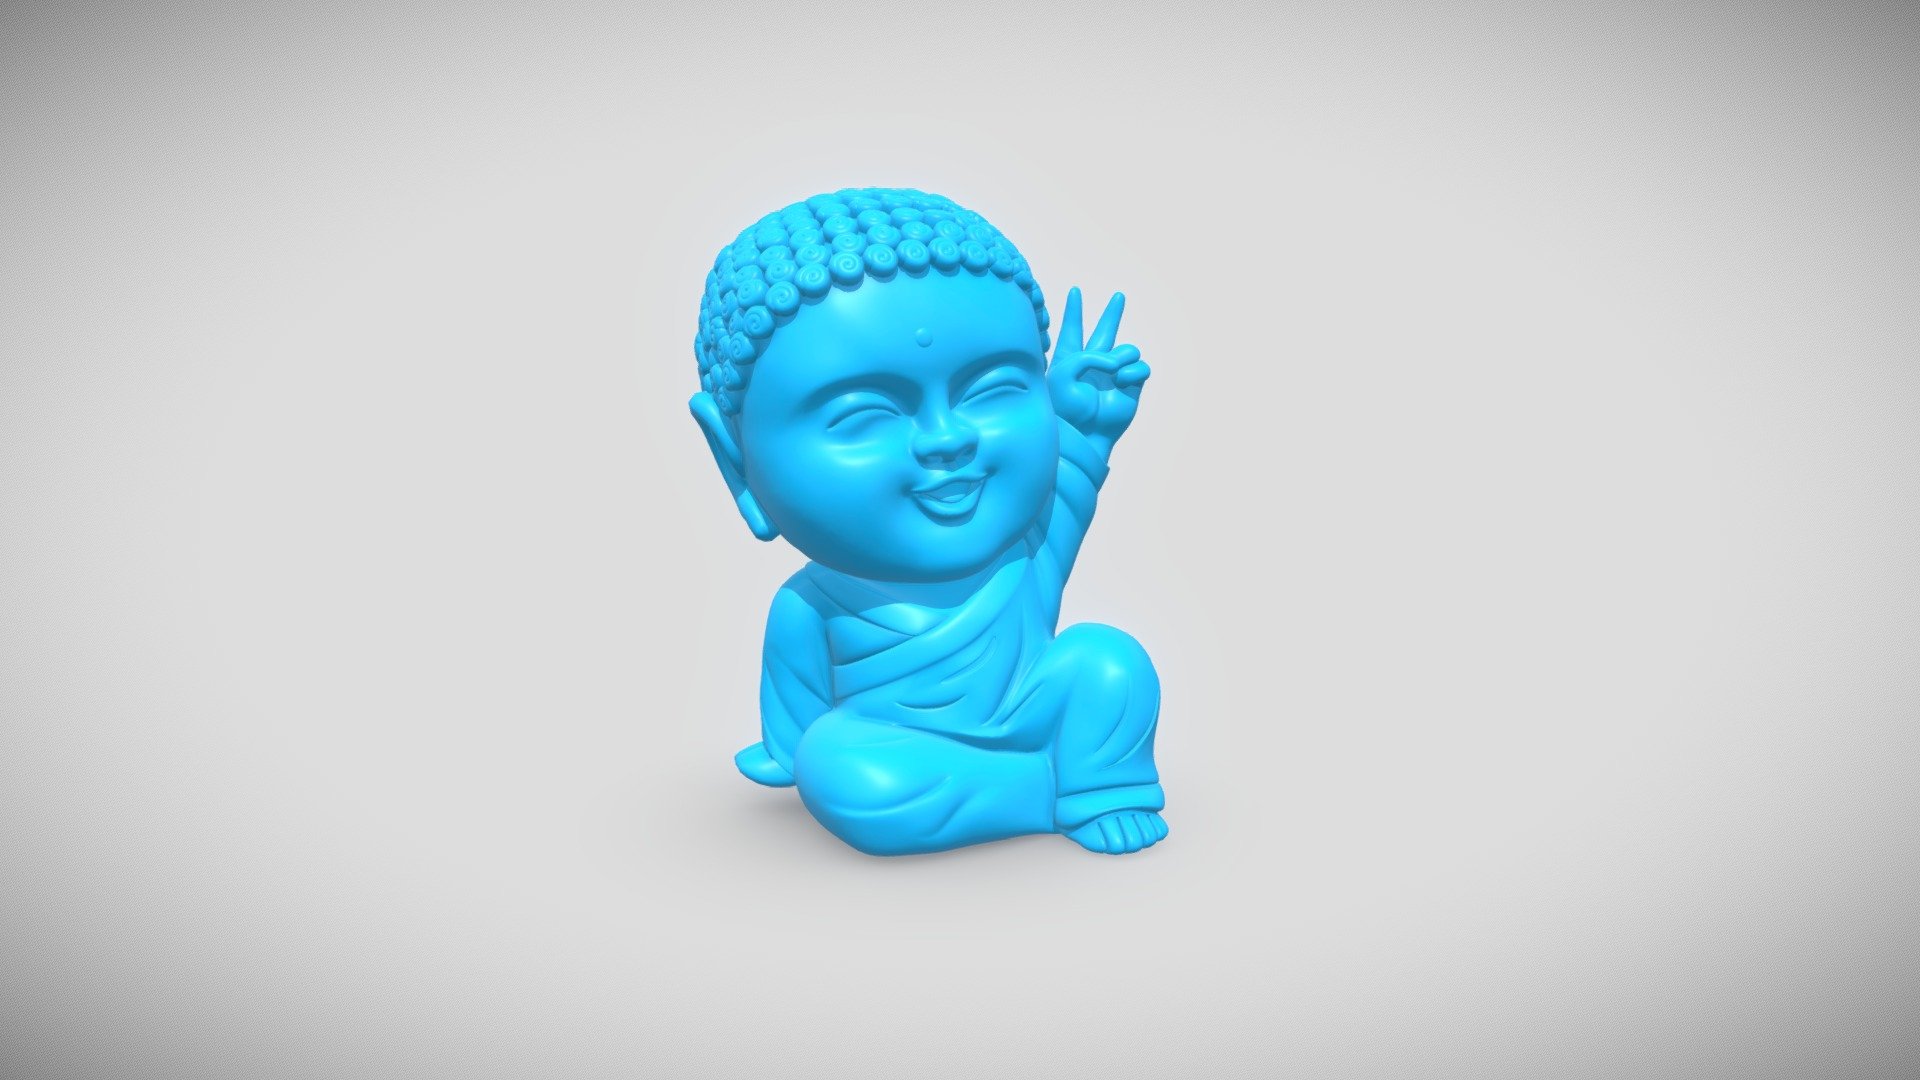 Introducing an adorable 3D masterpiece crafted with precision and artistry in 3ds Max - a captivating depiction of a Cute Baby Buddha. This charming creation seamlessly blends meticulous design and a heartwarming essence, resulting in a delightful representation that embodies tranquility and innocence 3d model